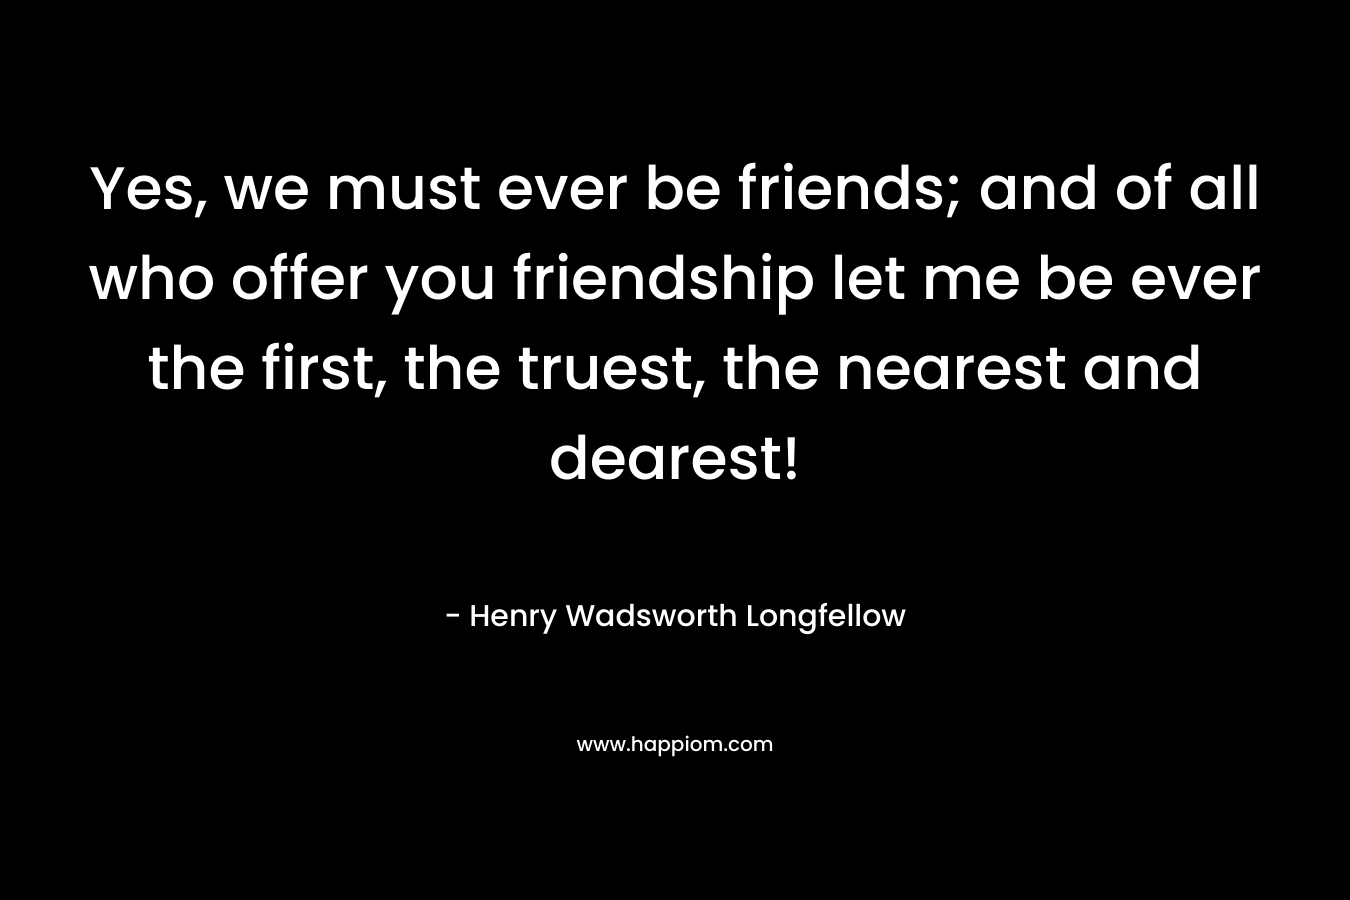 Yes, we must ever be friends; and of all who offer you friendship let me be ever the first, the truest, the nearest and dearest!